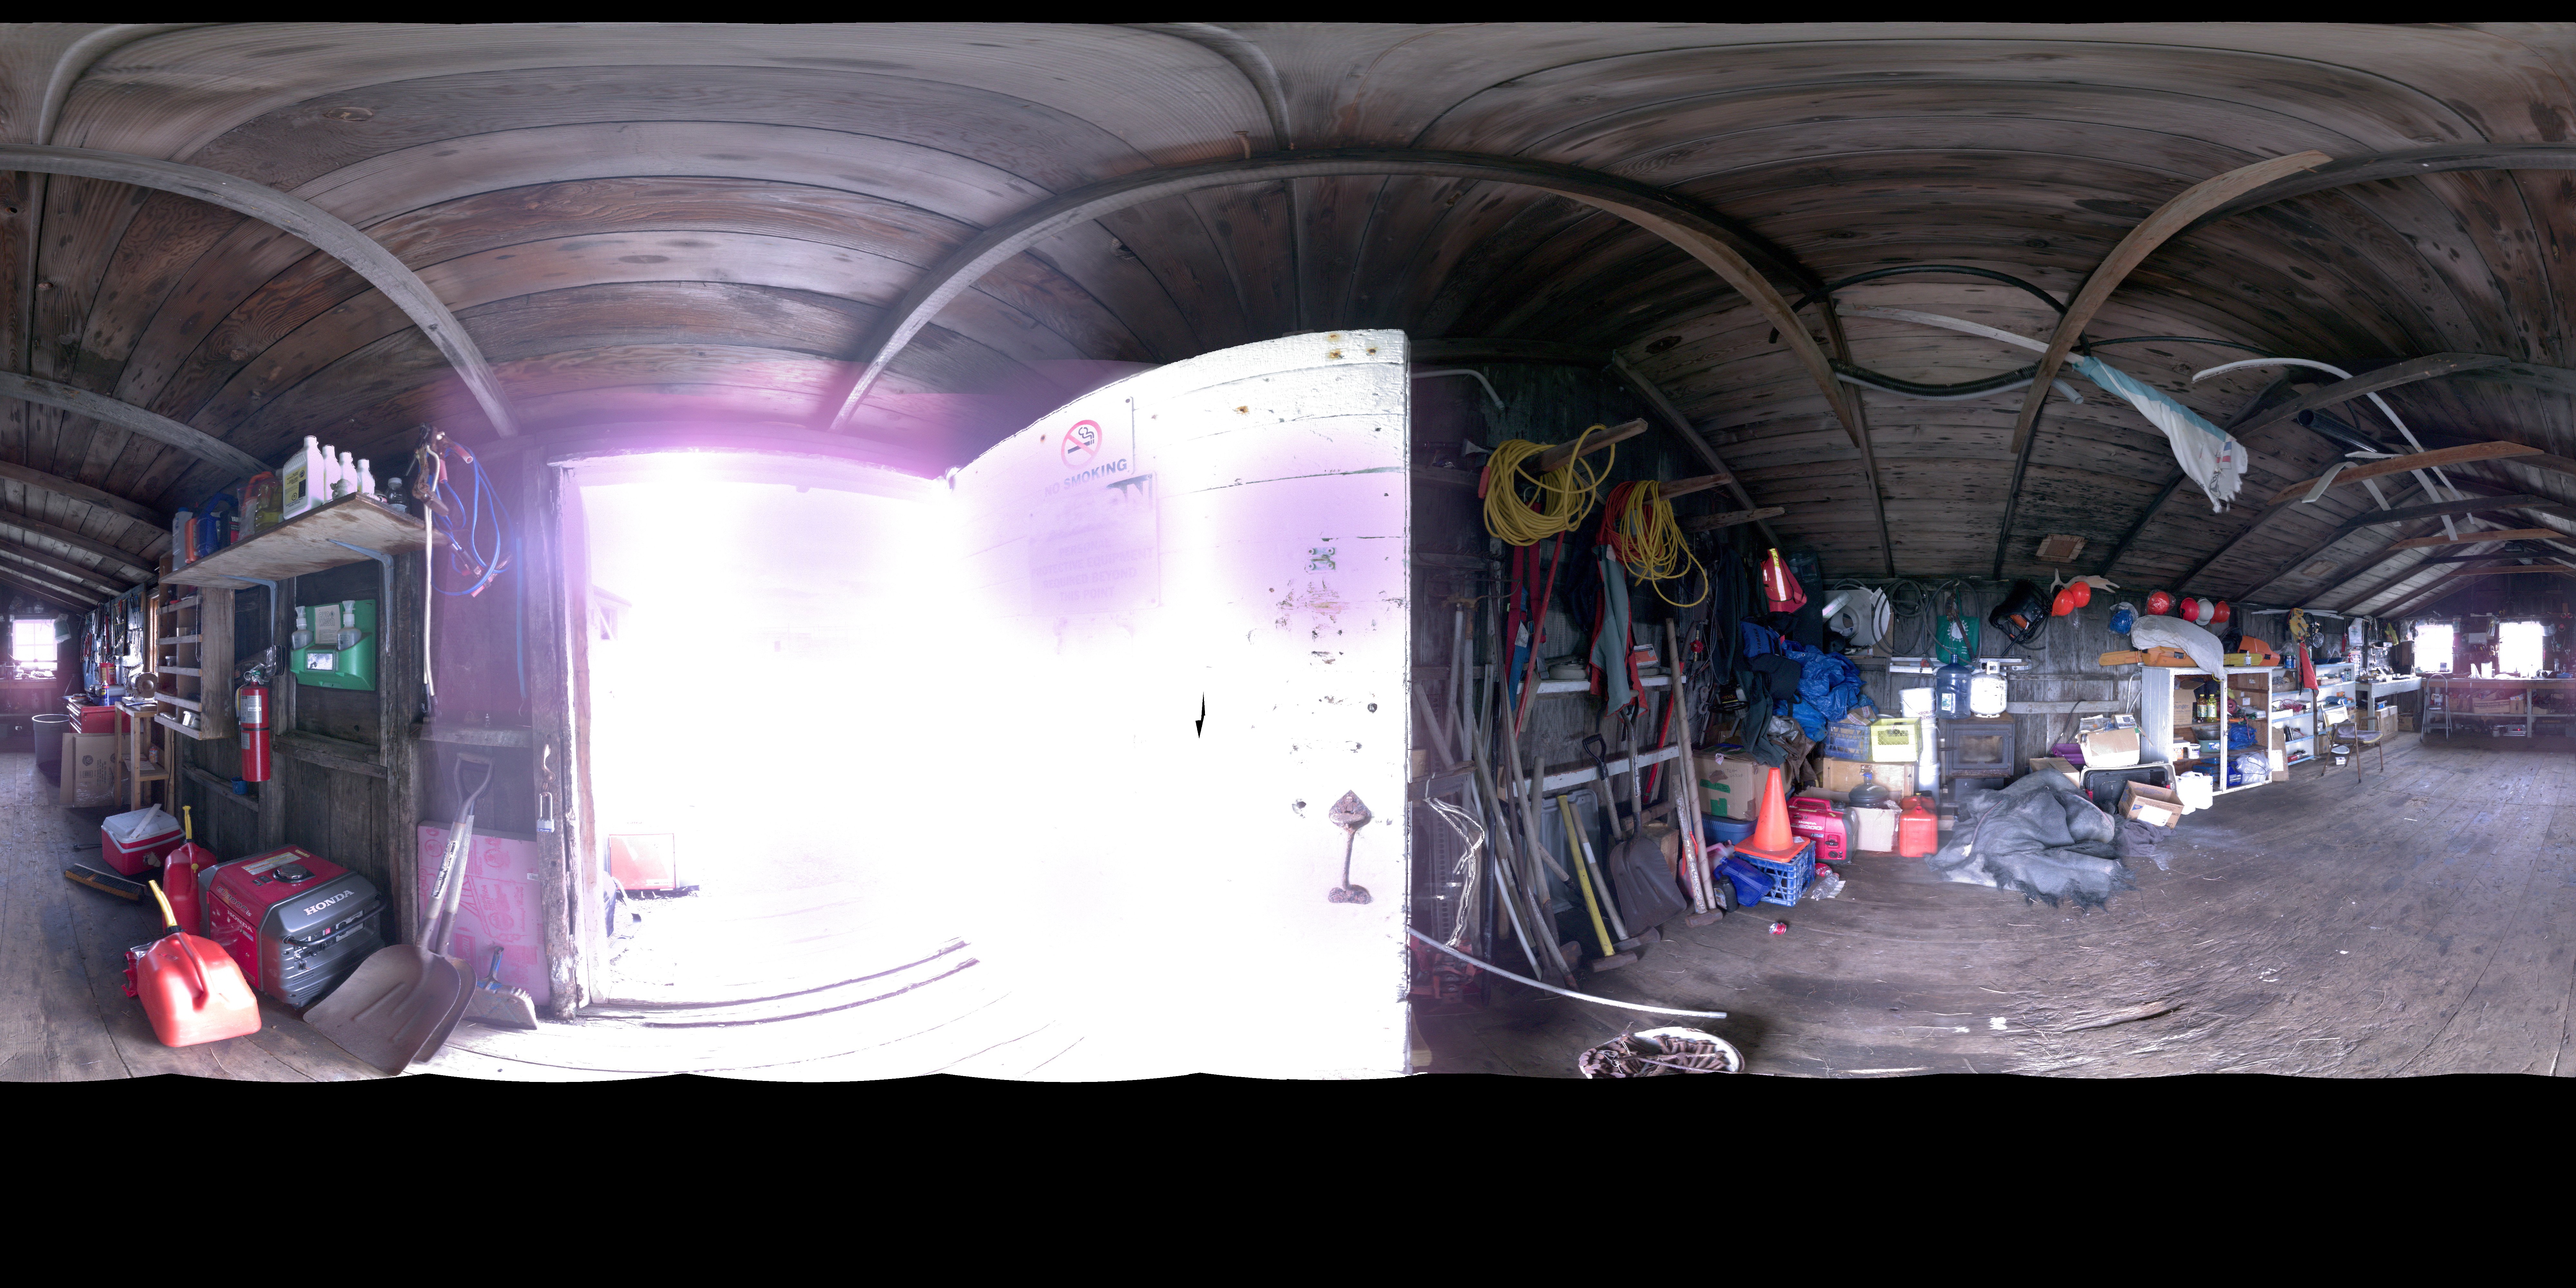 Panoramic view of the interior of the Blubber House from scanning location 5